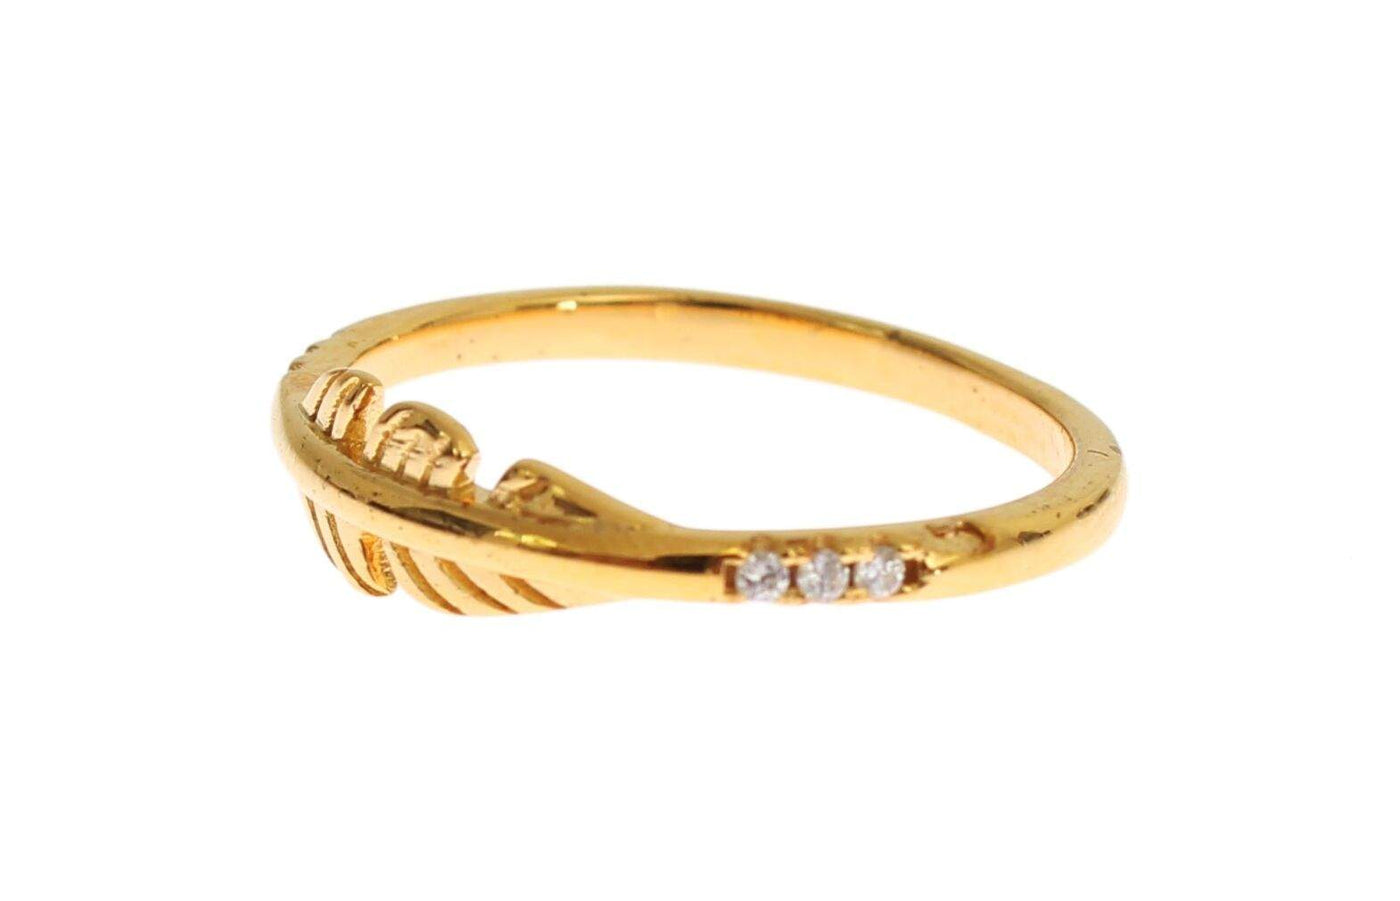 Nialaya Gold Clear CZ 925 Silver Ring #women, Accessories - New Arrivals, EU54 | US7, EU56 | US8, feed-agegroup-adult, feed-color-gold, feed-gender-female, Gold, Nialaya, Rings - Women - Jewelry at SEYMAYKA